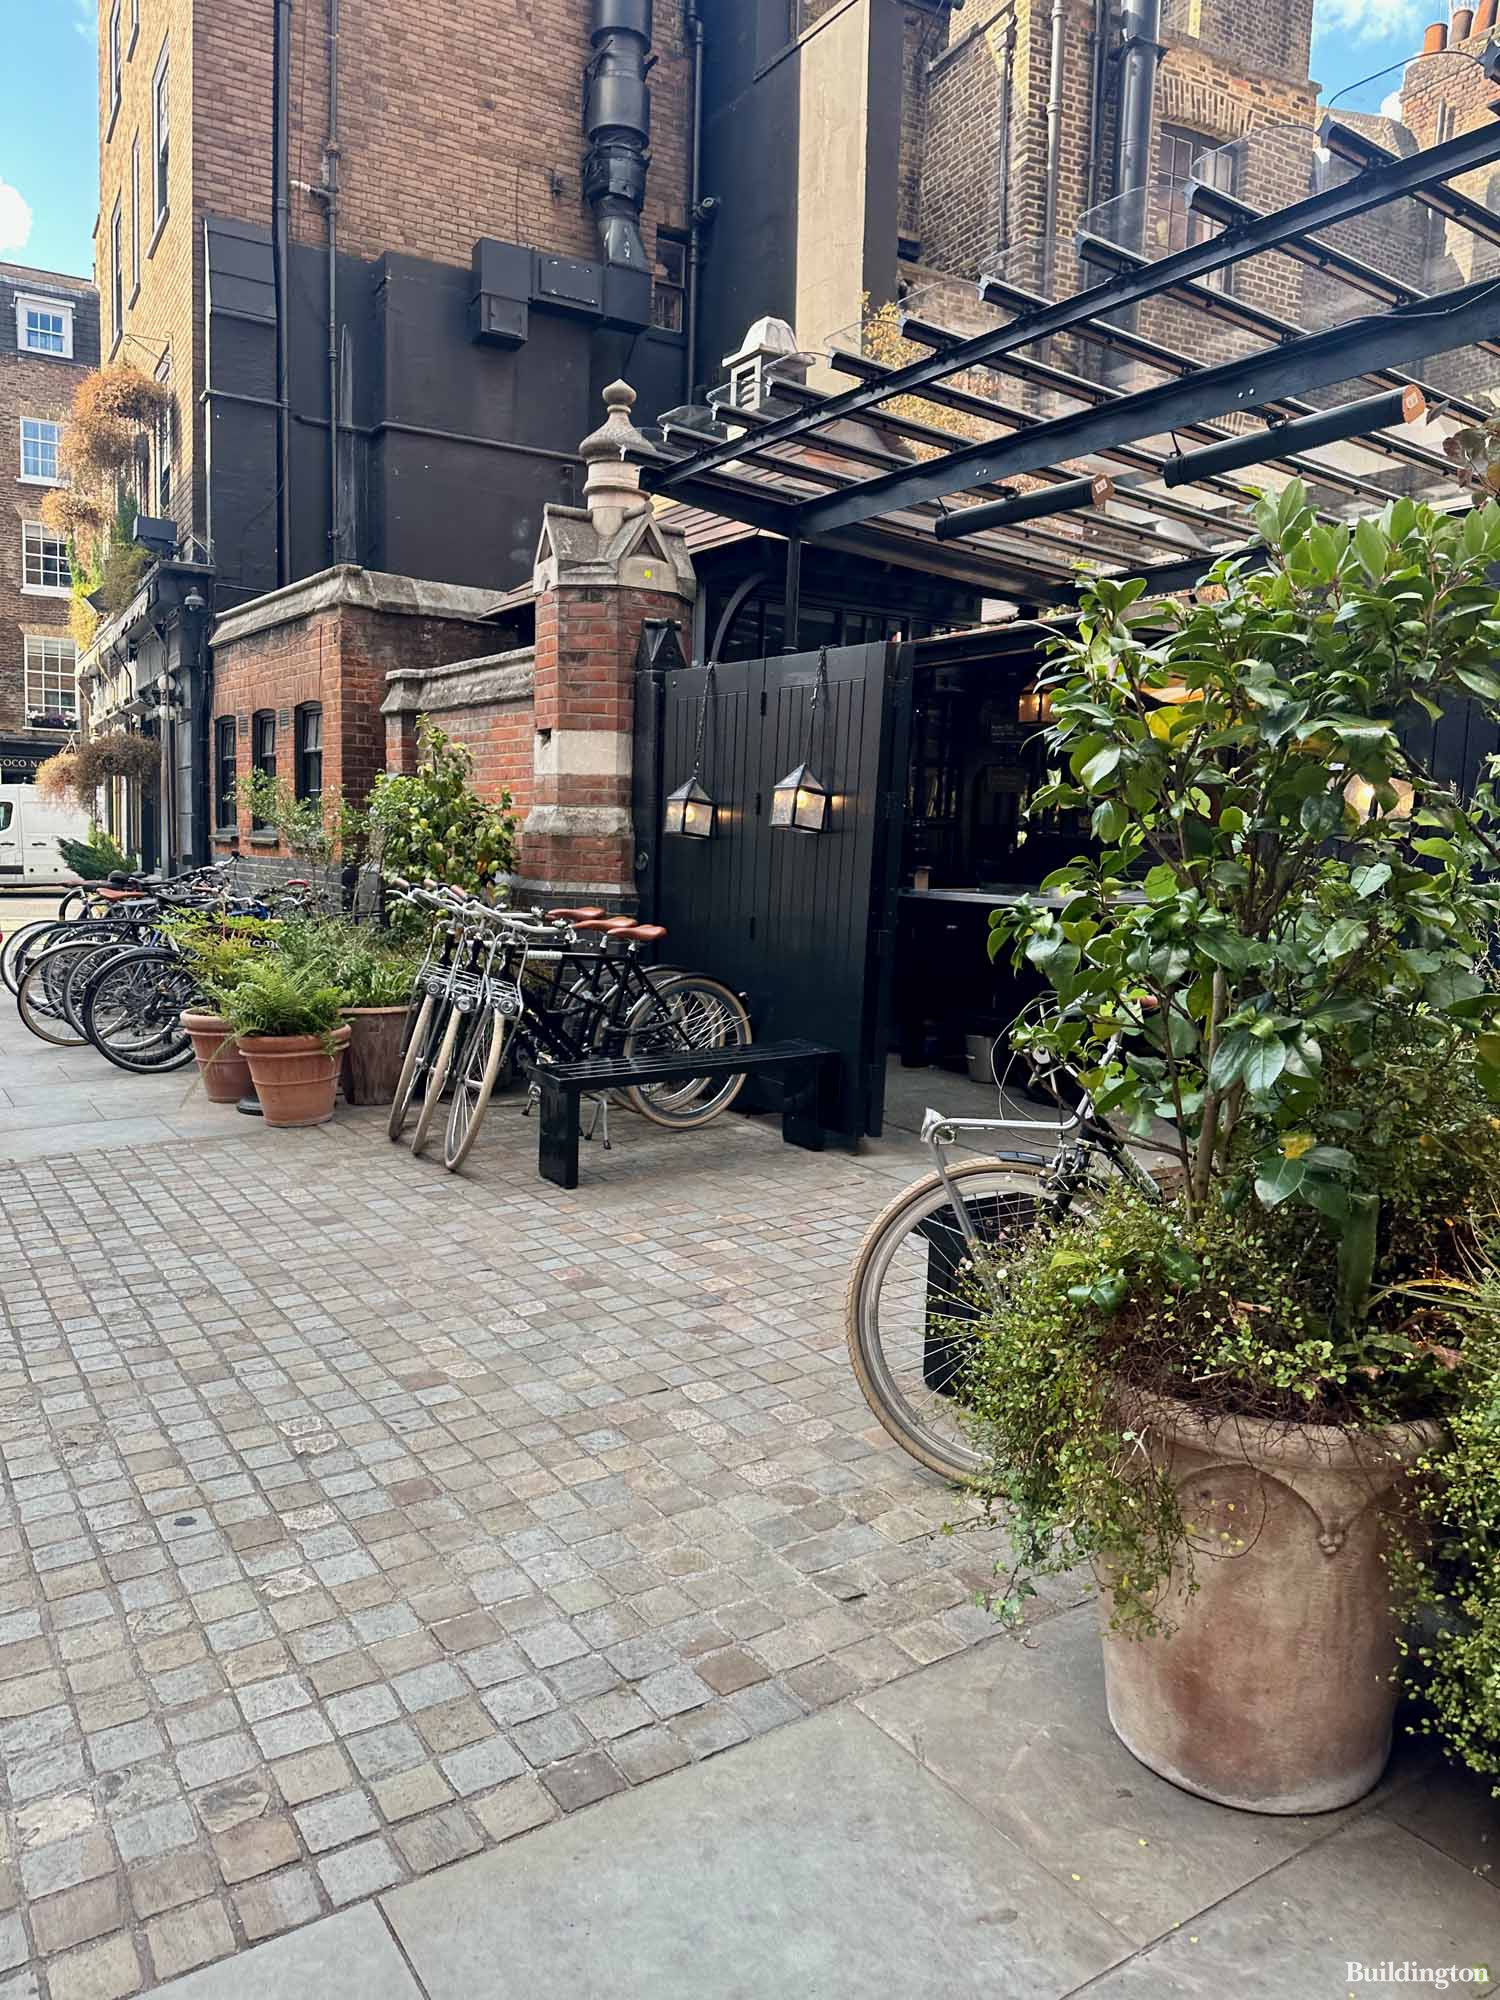 Entrance to Chiltern Firehouse on Chiltern Street